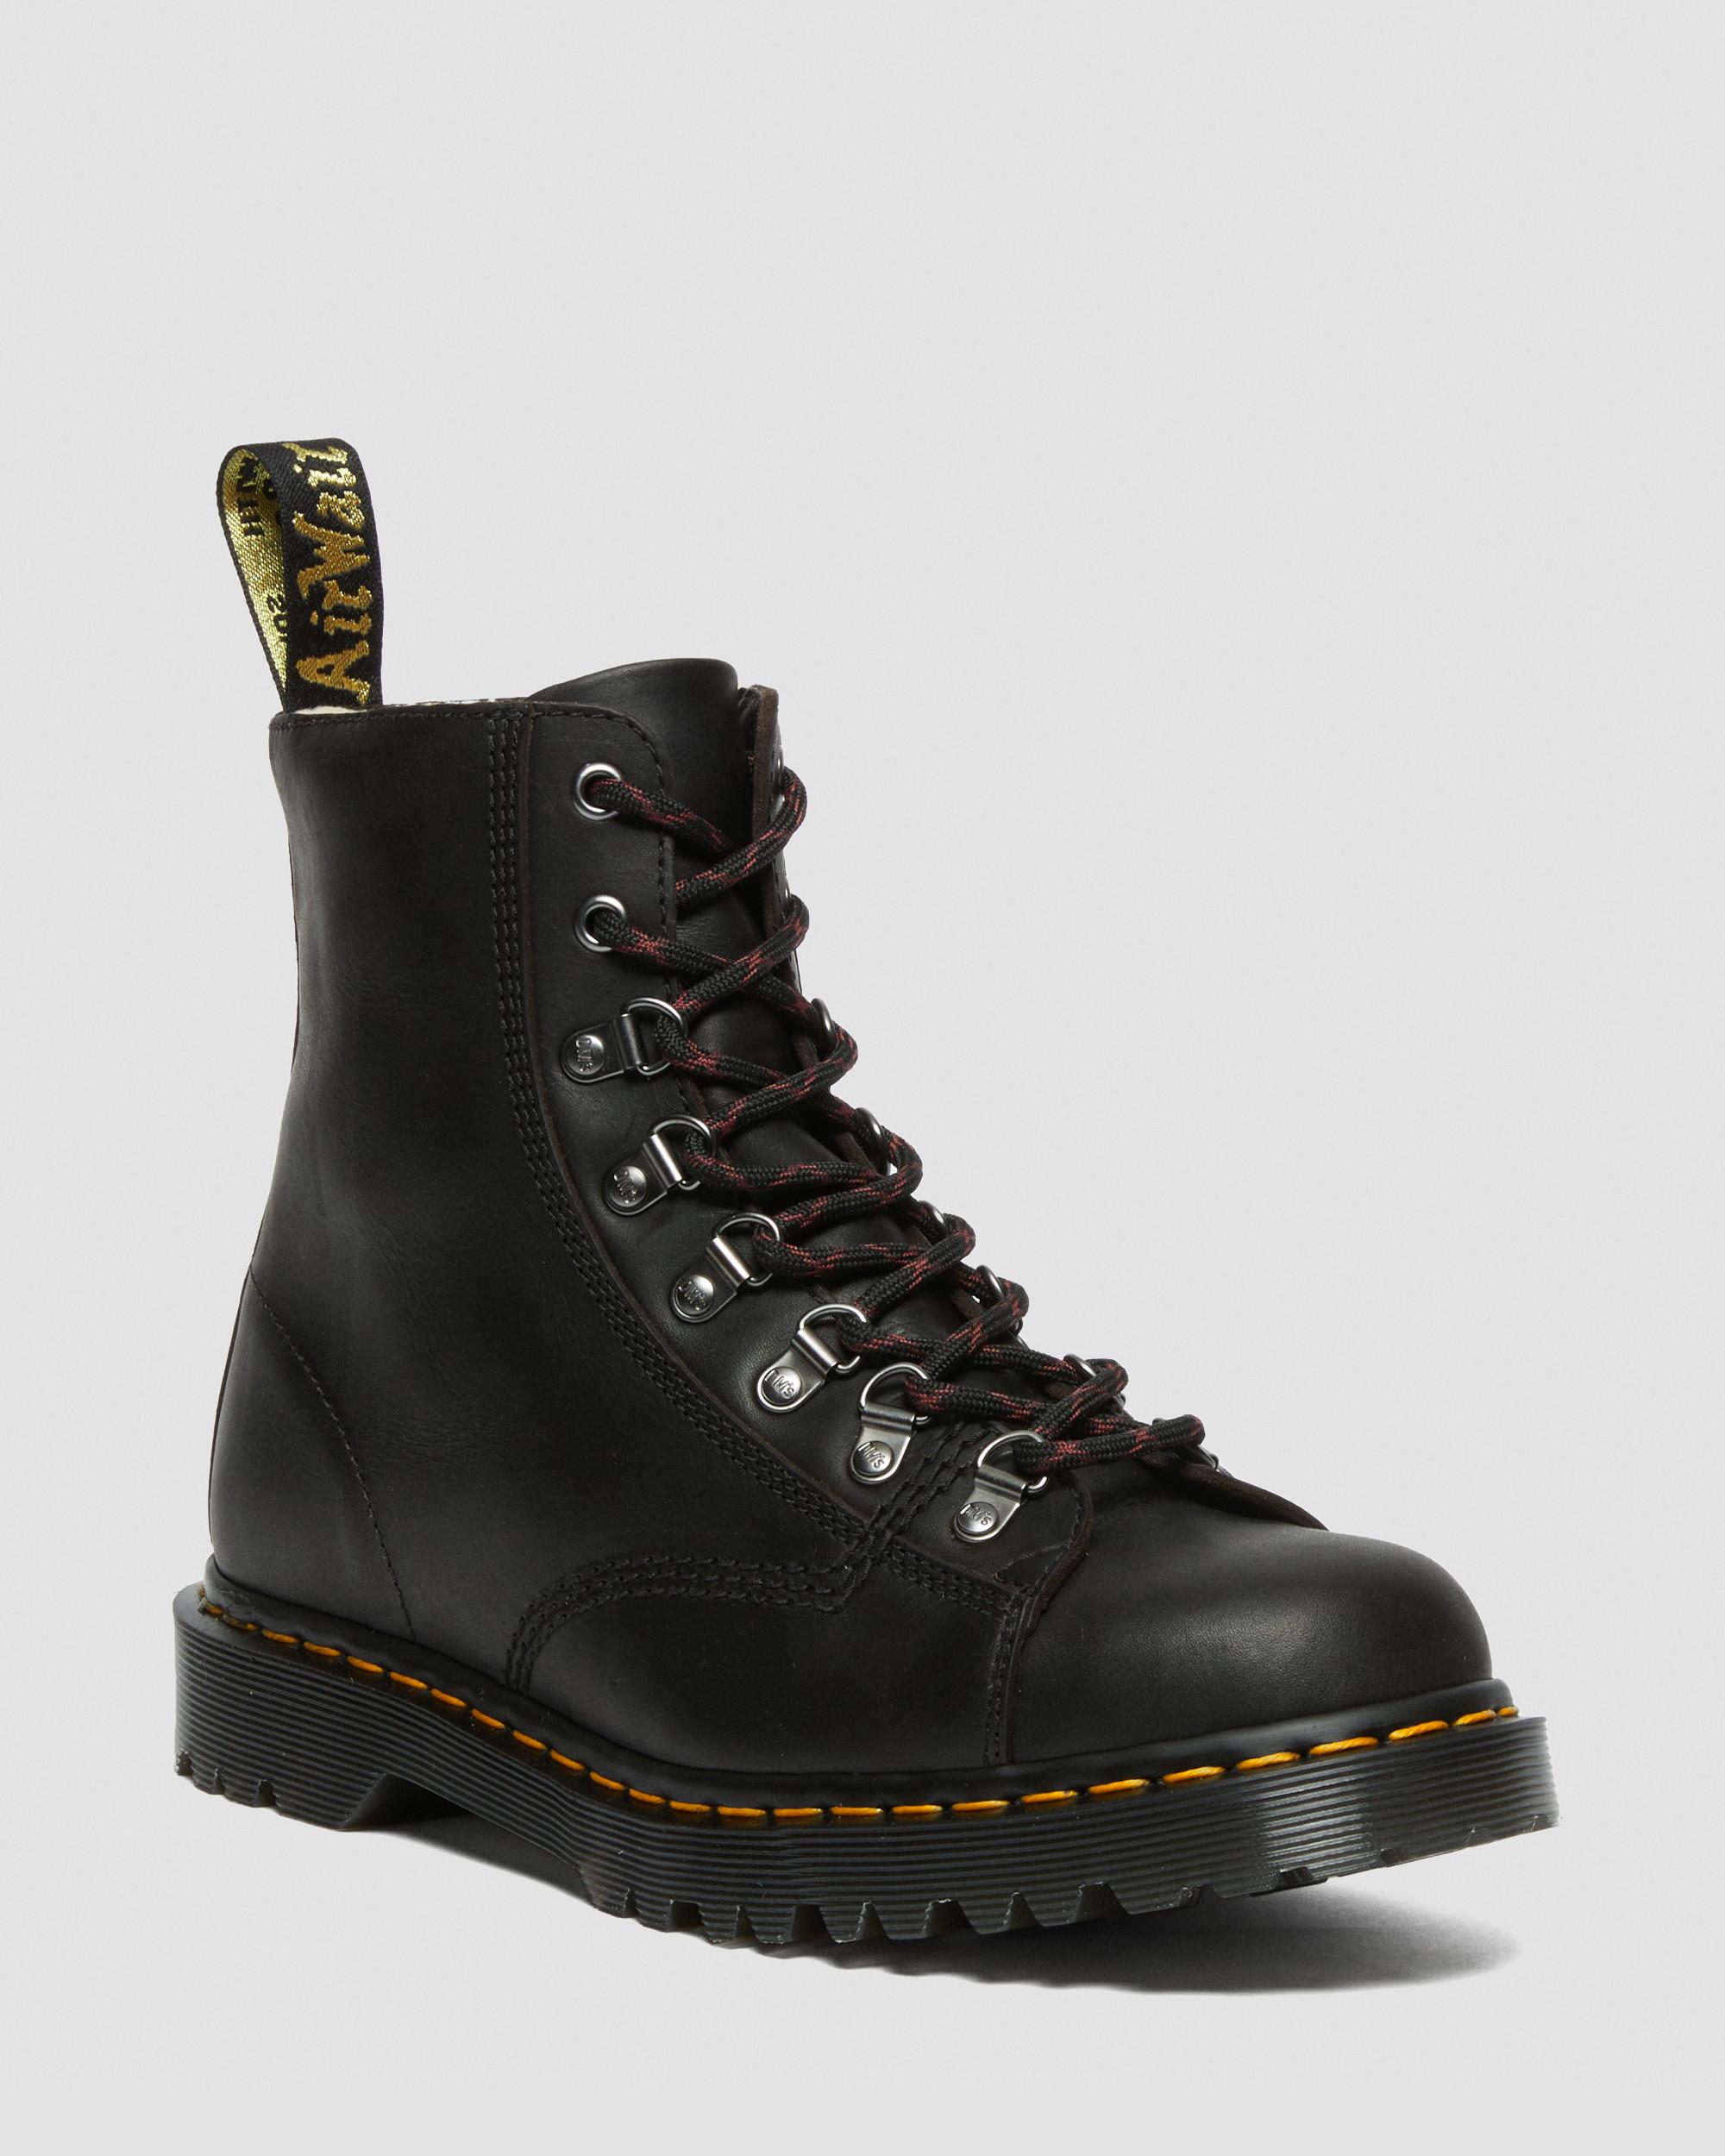 Barton Made in England Classic Oil Leather Boots | Dr. Martens